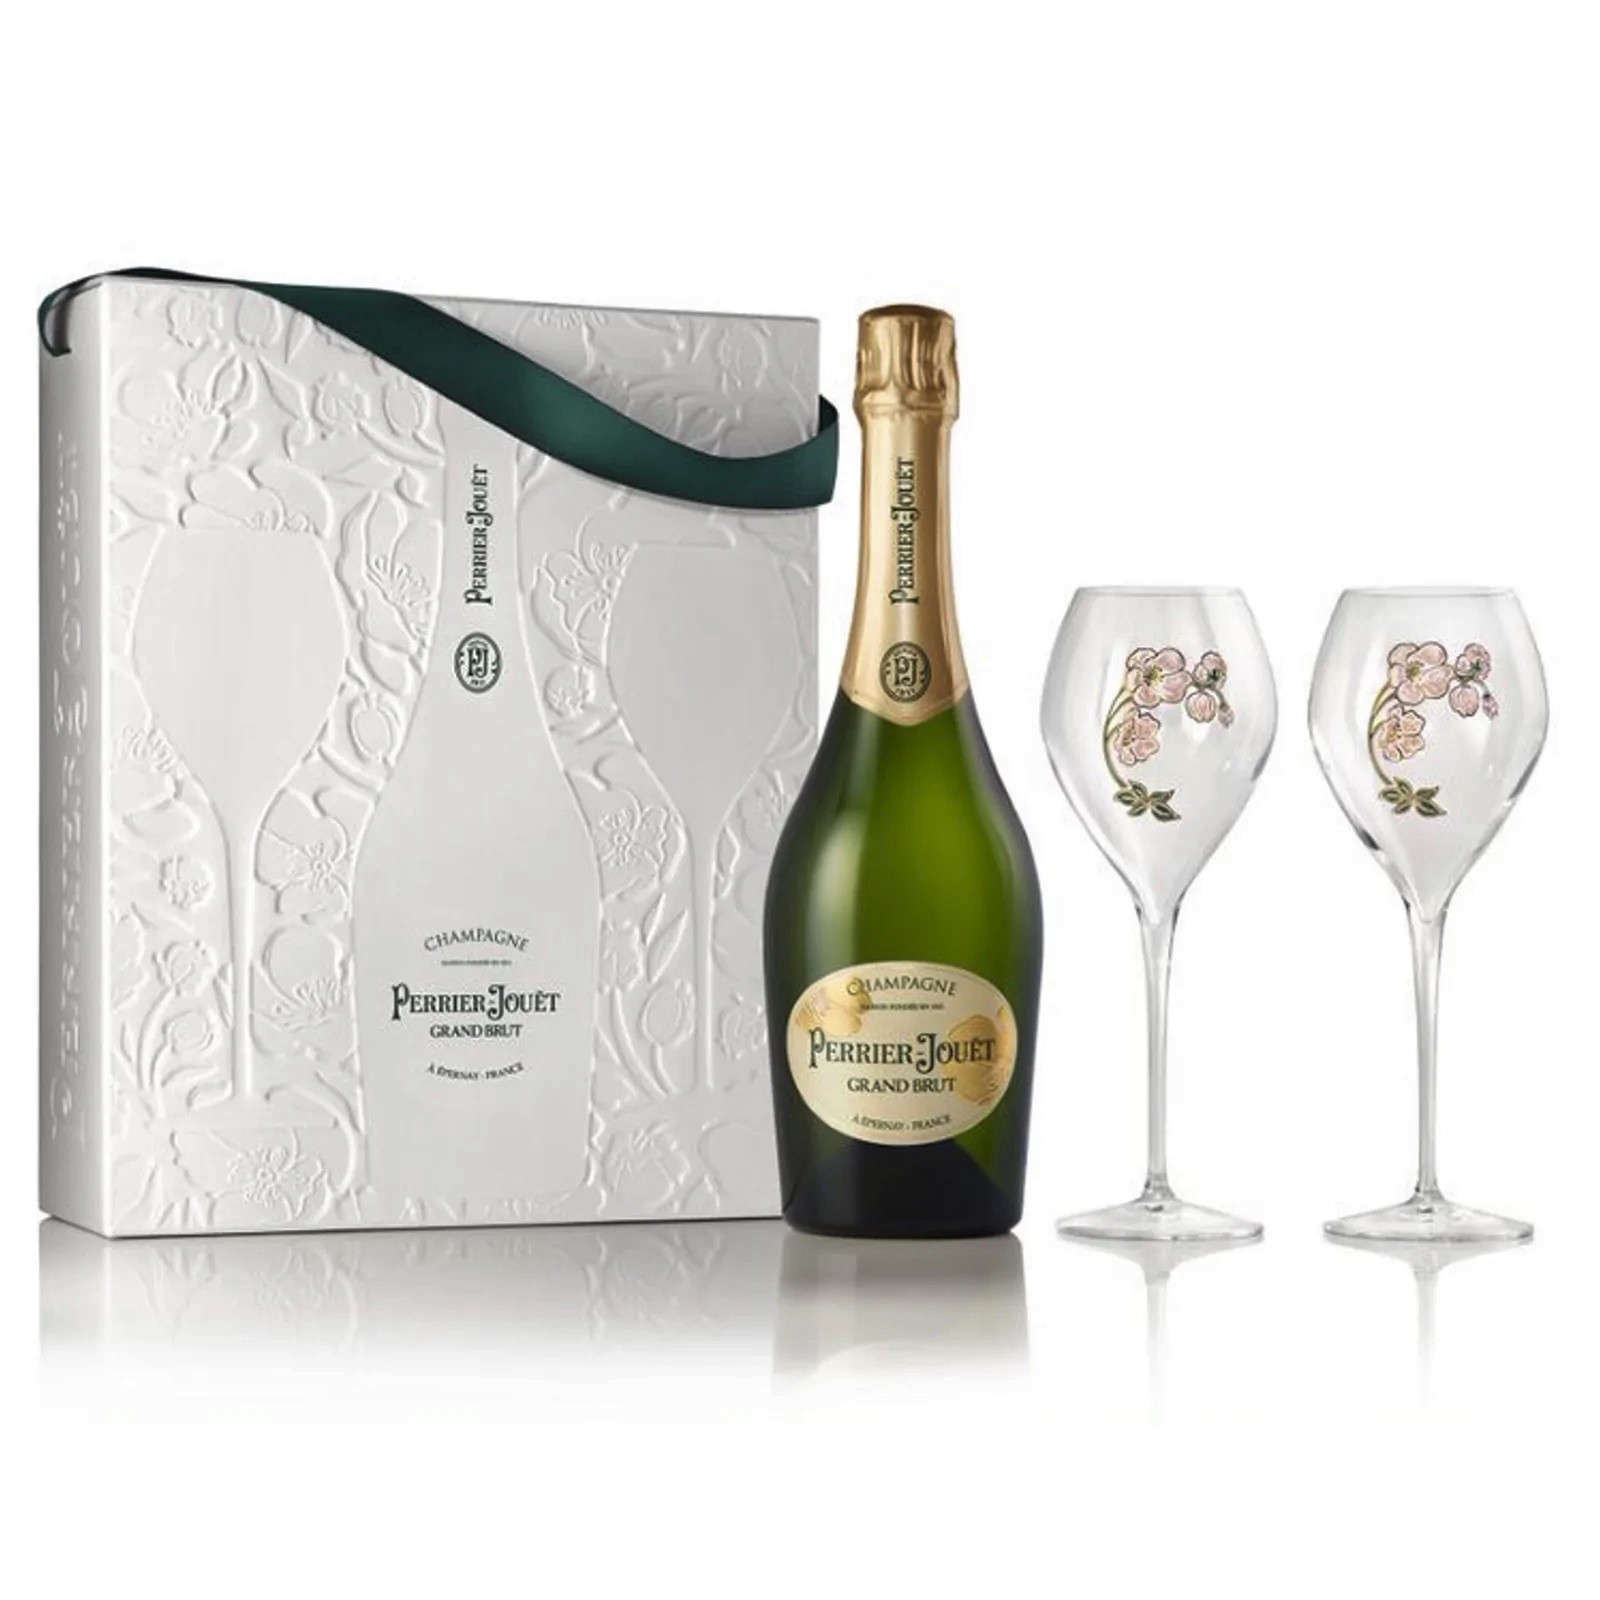 Perrier Jouet Grand Brut with 2 Champagne Flutes Gift Set in Box – 750ml